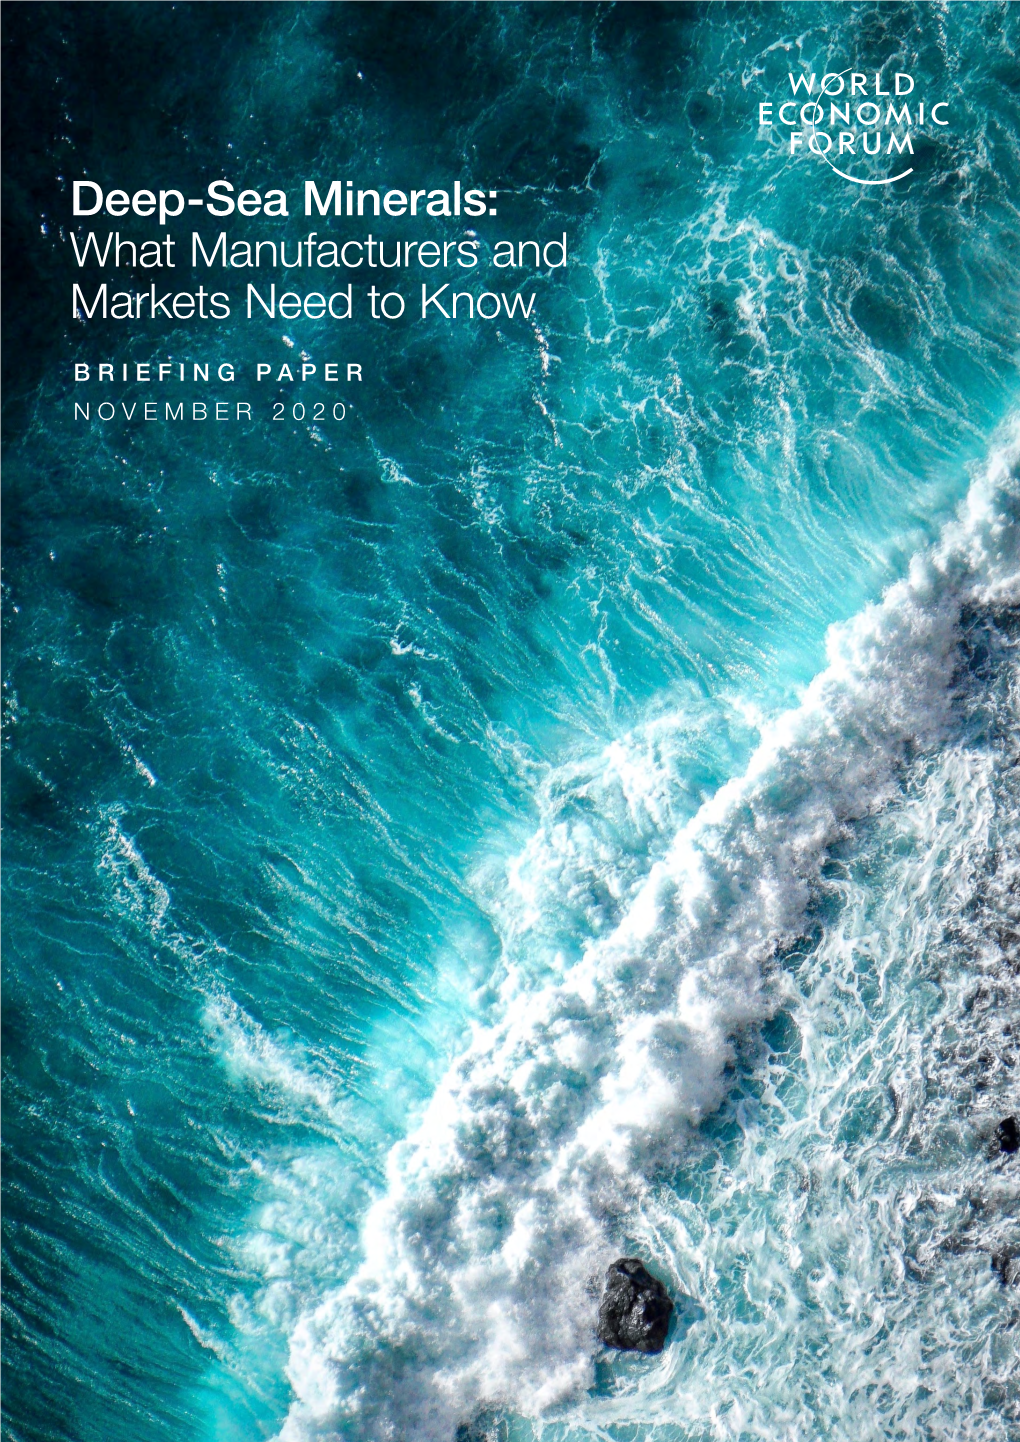 Deep-Sea Minerals: What Manufacturers and Markets Need to Know